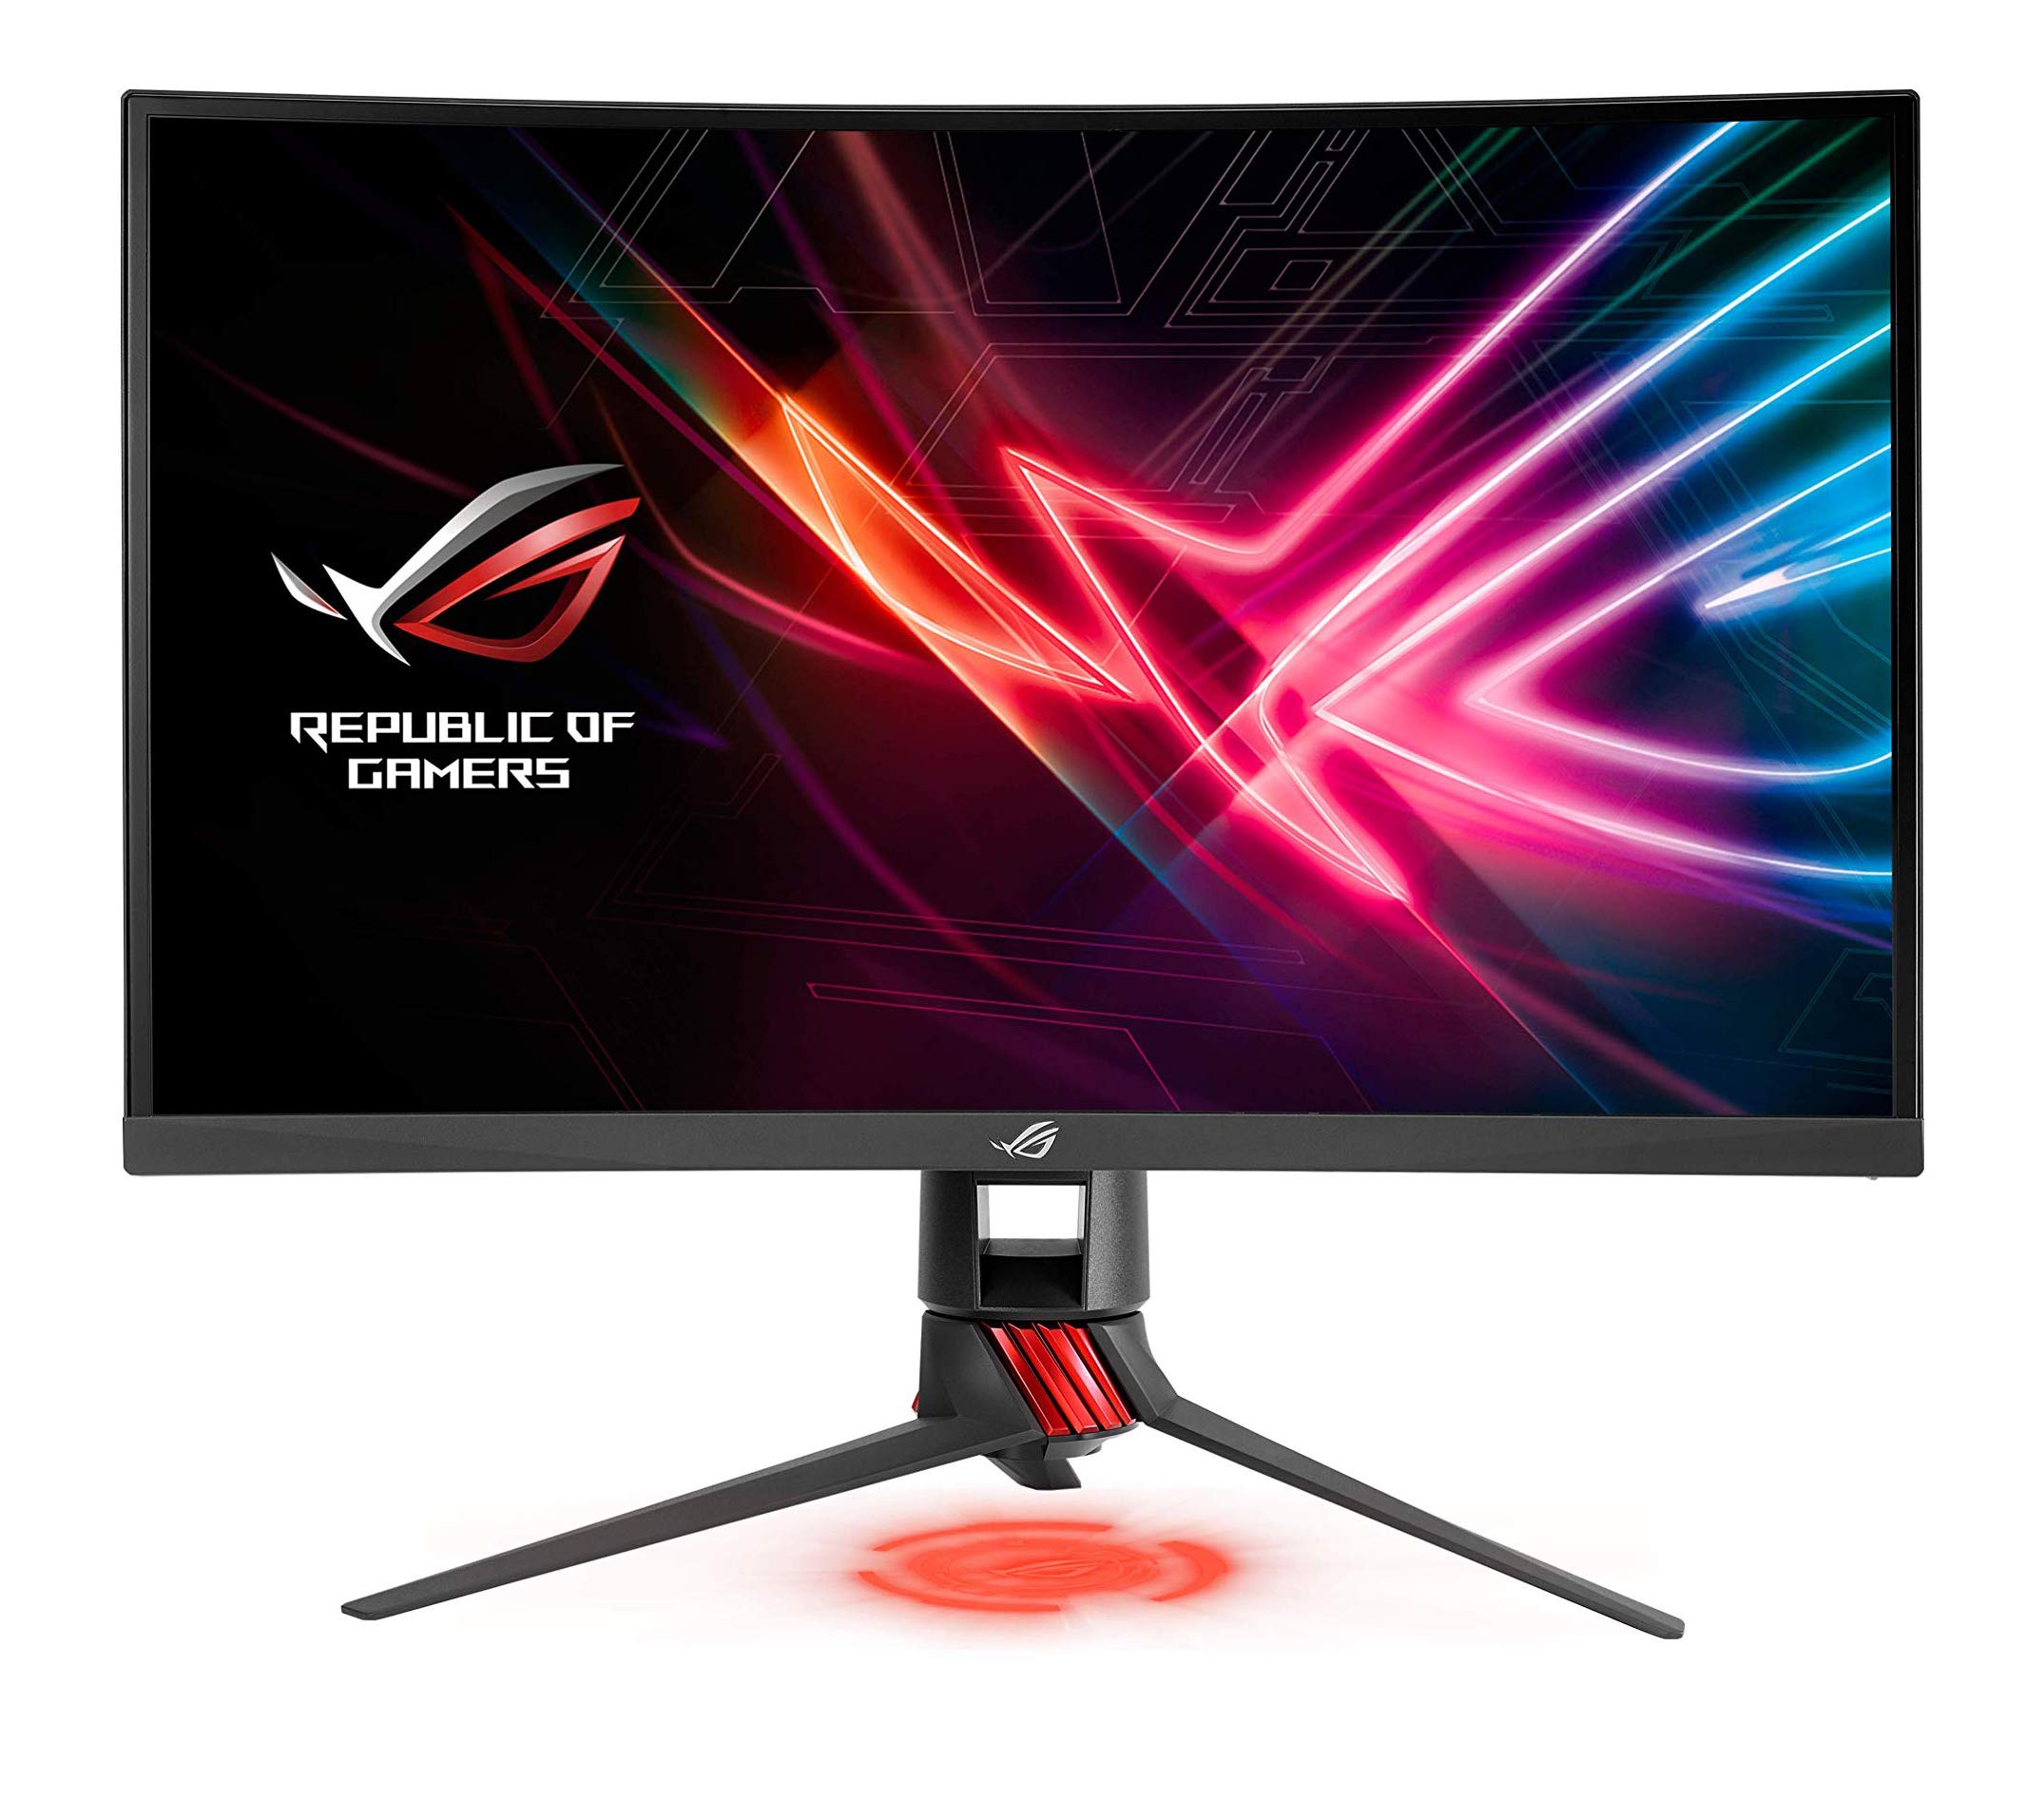 Asus ROG Strix 27” Curved Gaming Monitor Full HD 1080p 144Hz DP HDMI DVI Fully Adjustable Function w/ Industry leading 3 years warranty (XG27VQ)